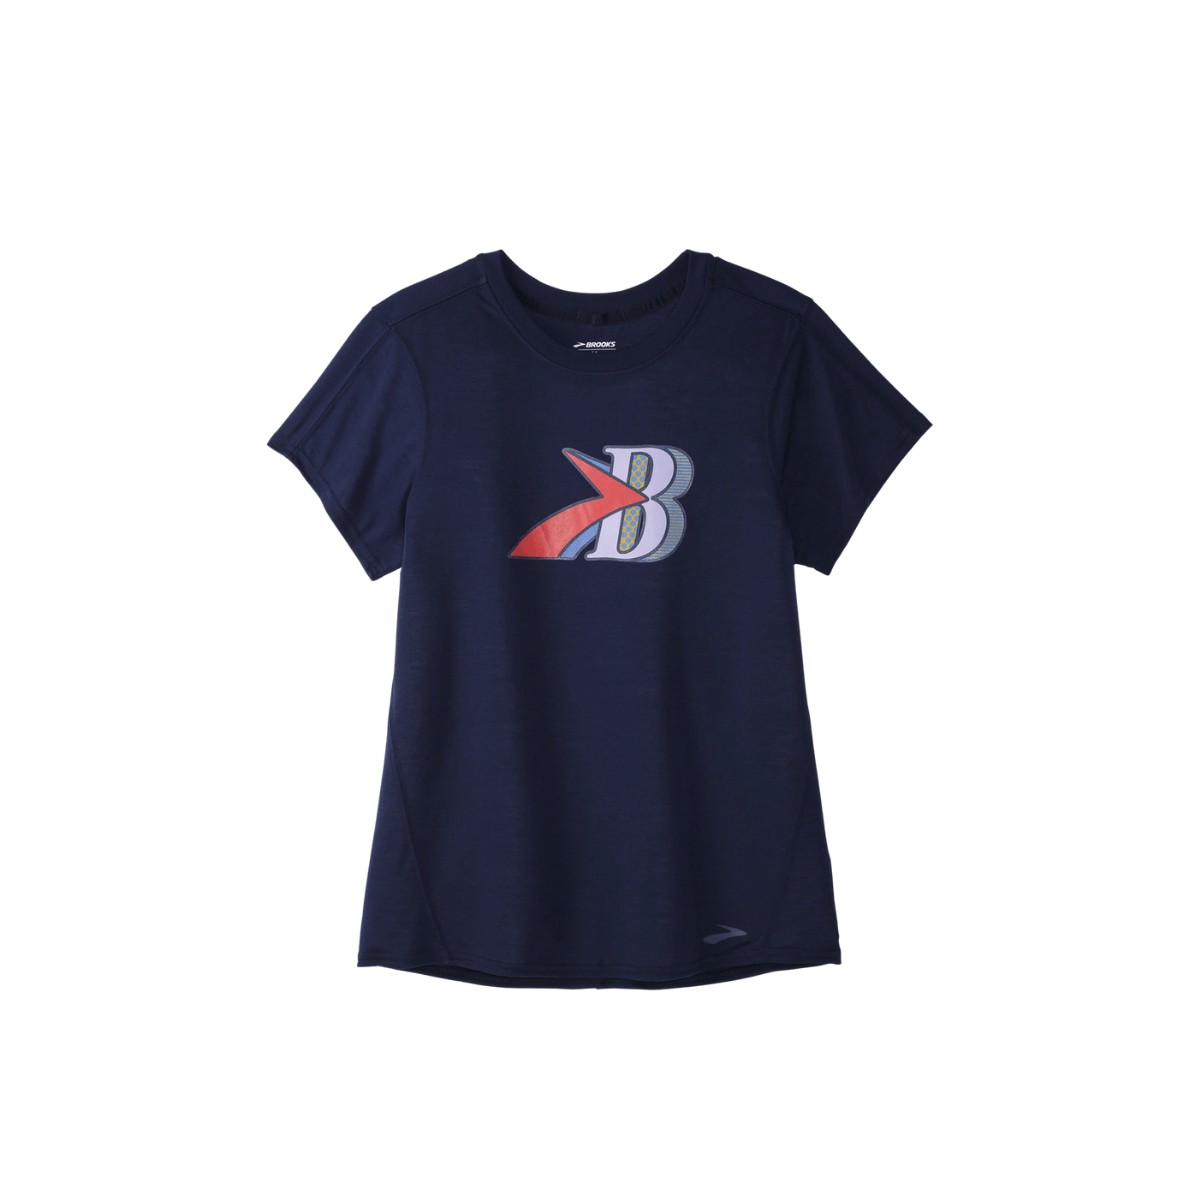 T-Shirt Brooks Distance Graphic Short Sleeve Navy Blue, Taille S